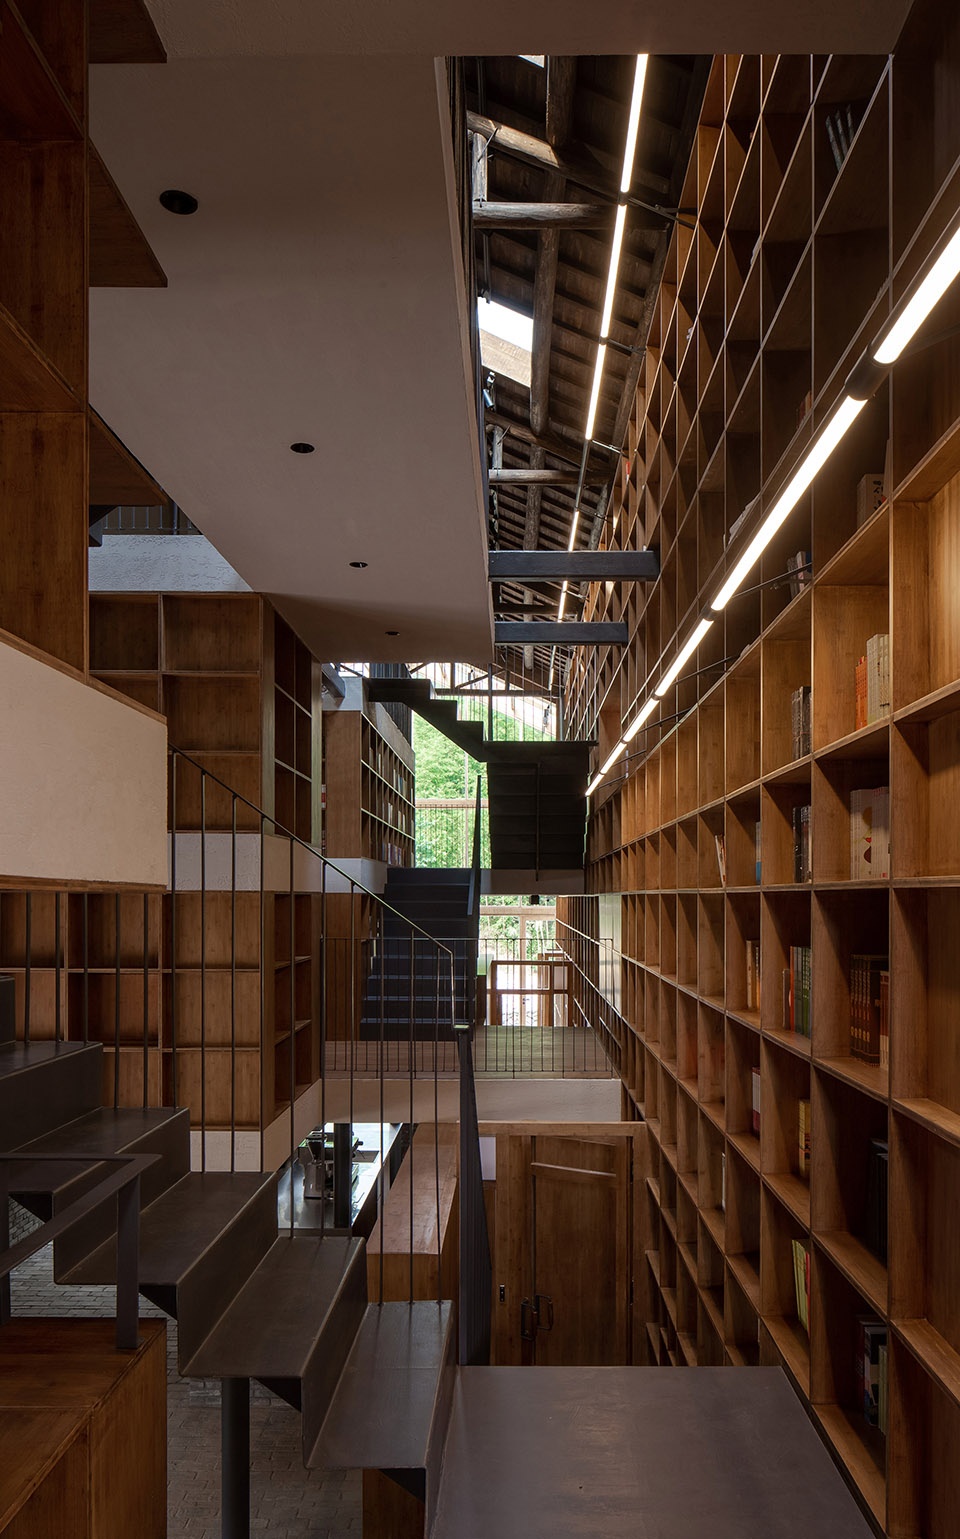 016-capsule-hotel-and-bookstore-in-village-qinglongwu-china-by-atelier-taoc-960x1539.jpg